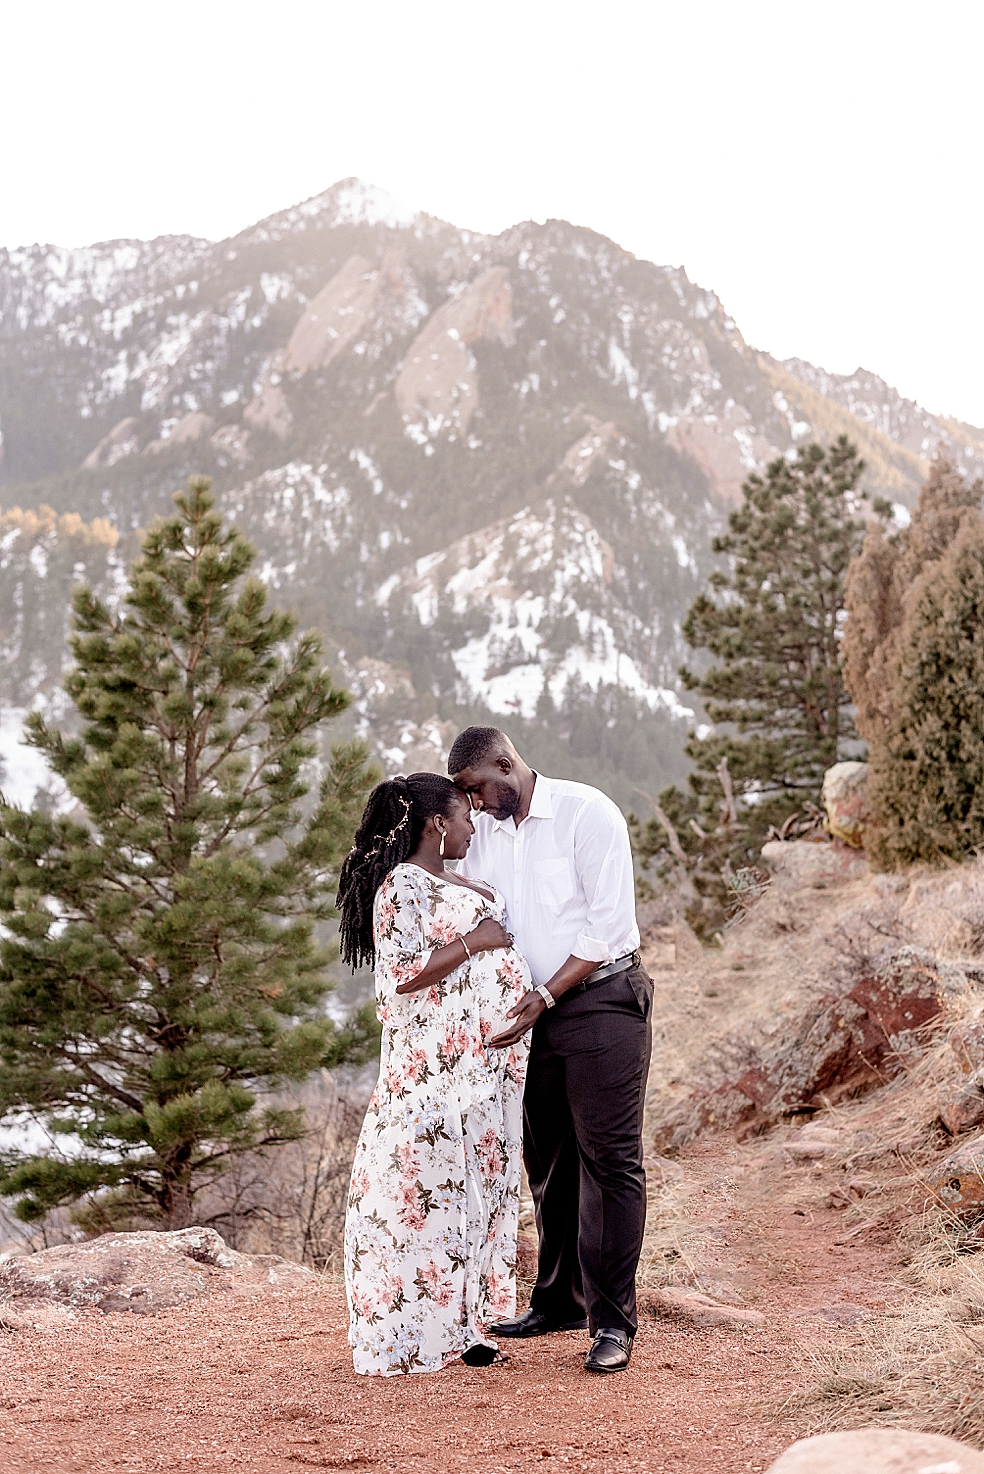 Mom and dad to be snuggling together in front of mountains | Photo by Huntsville Motherhood Photographer Jessica Lee Photography